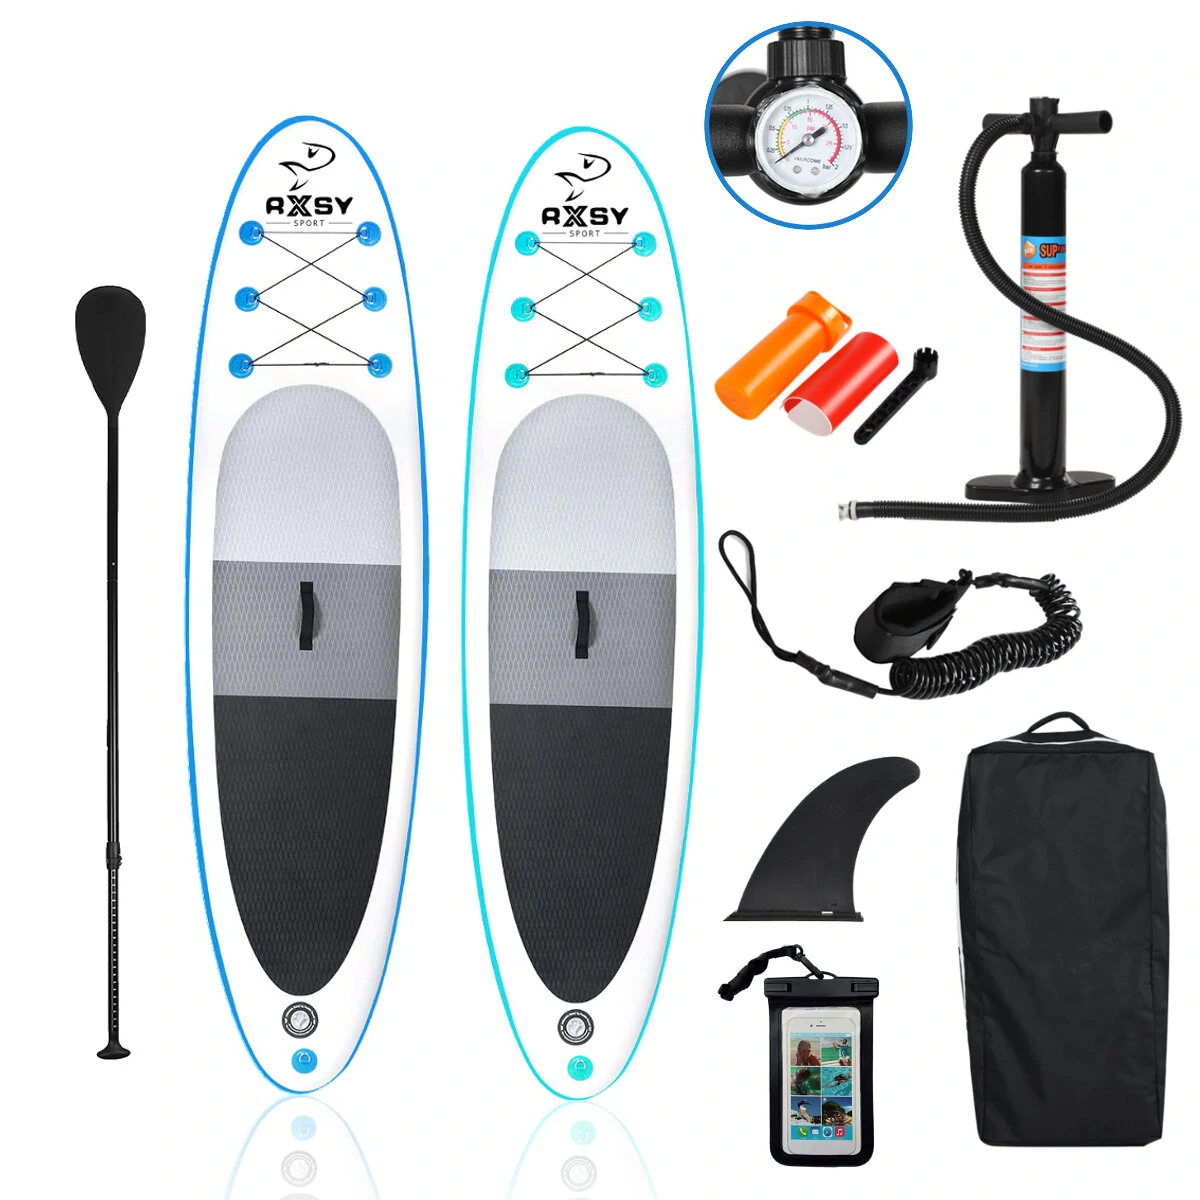 RXSY 10.5′ Inflatable Stand Up Paddle Board 10.5x30x6 Sup-Board Surfboard Kayak Surf Set with Backpack Leash Pump Waterproof Bag Fins